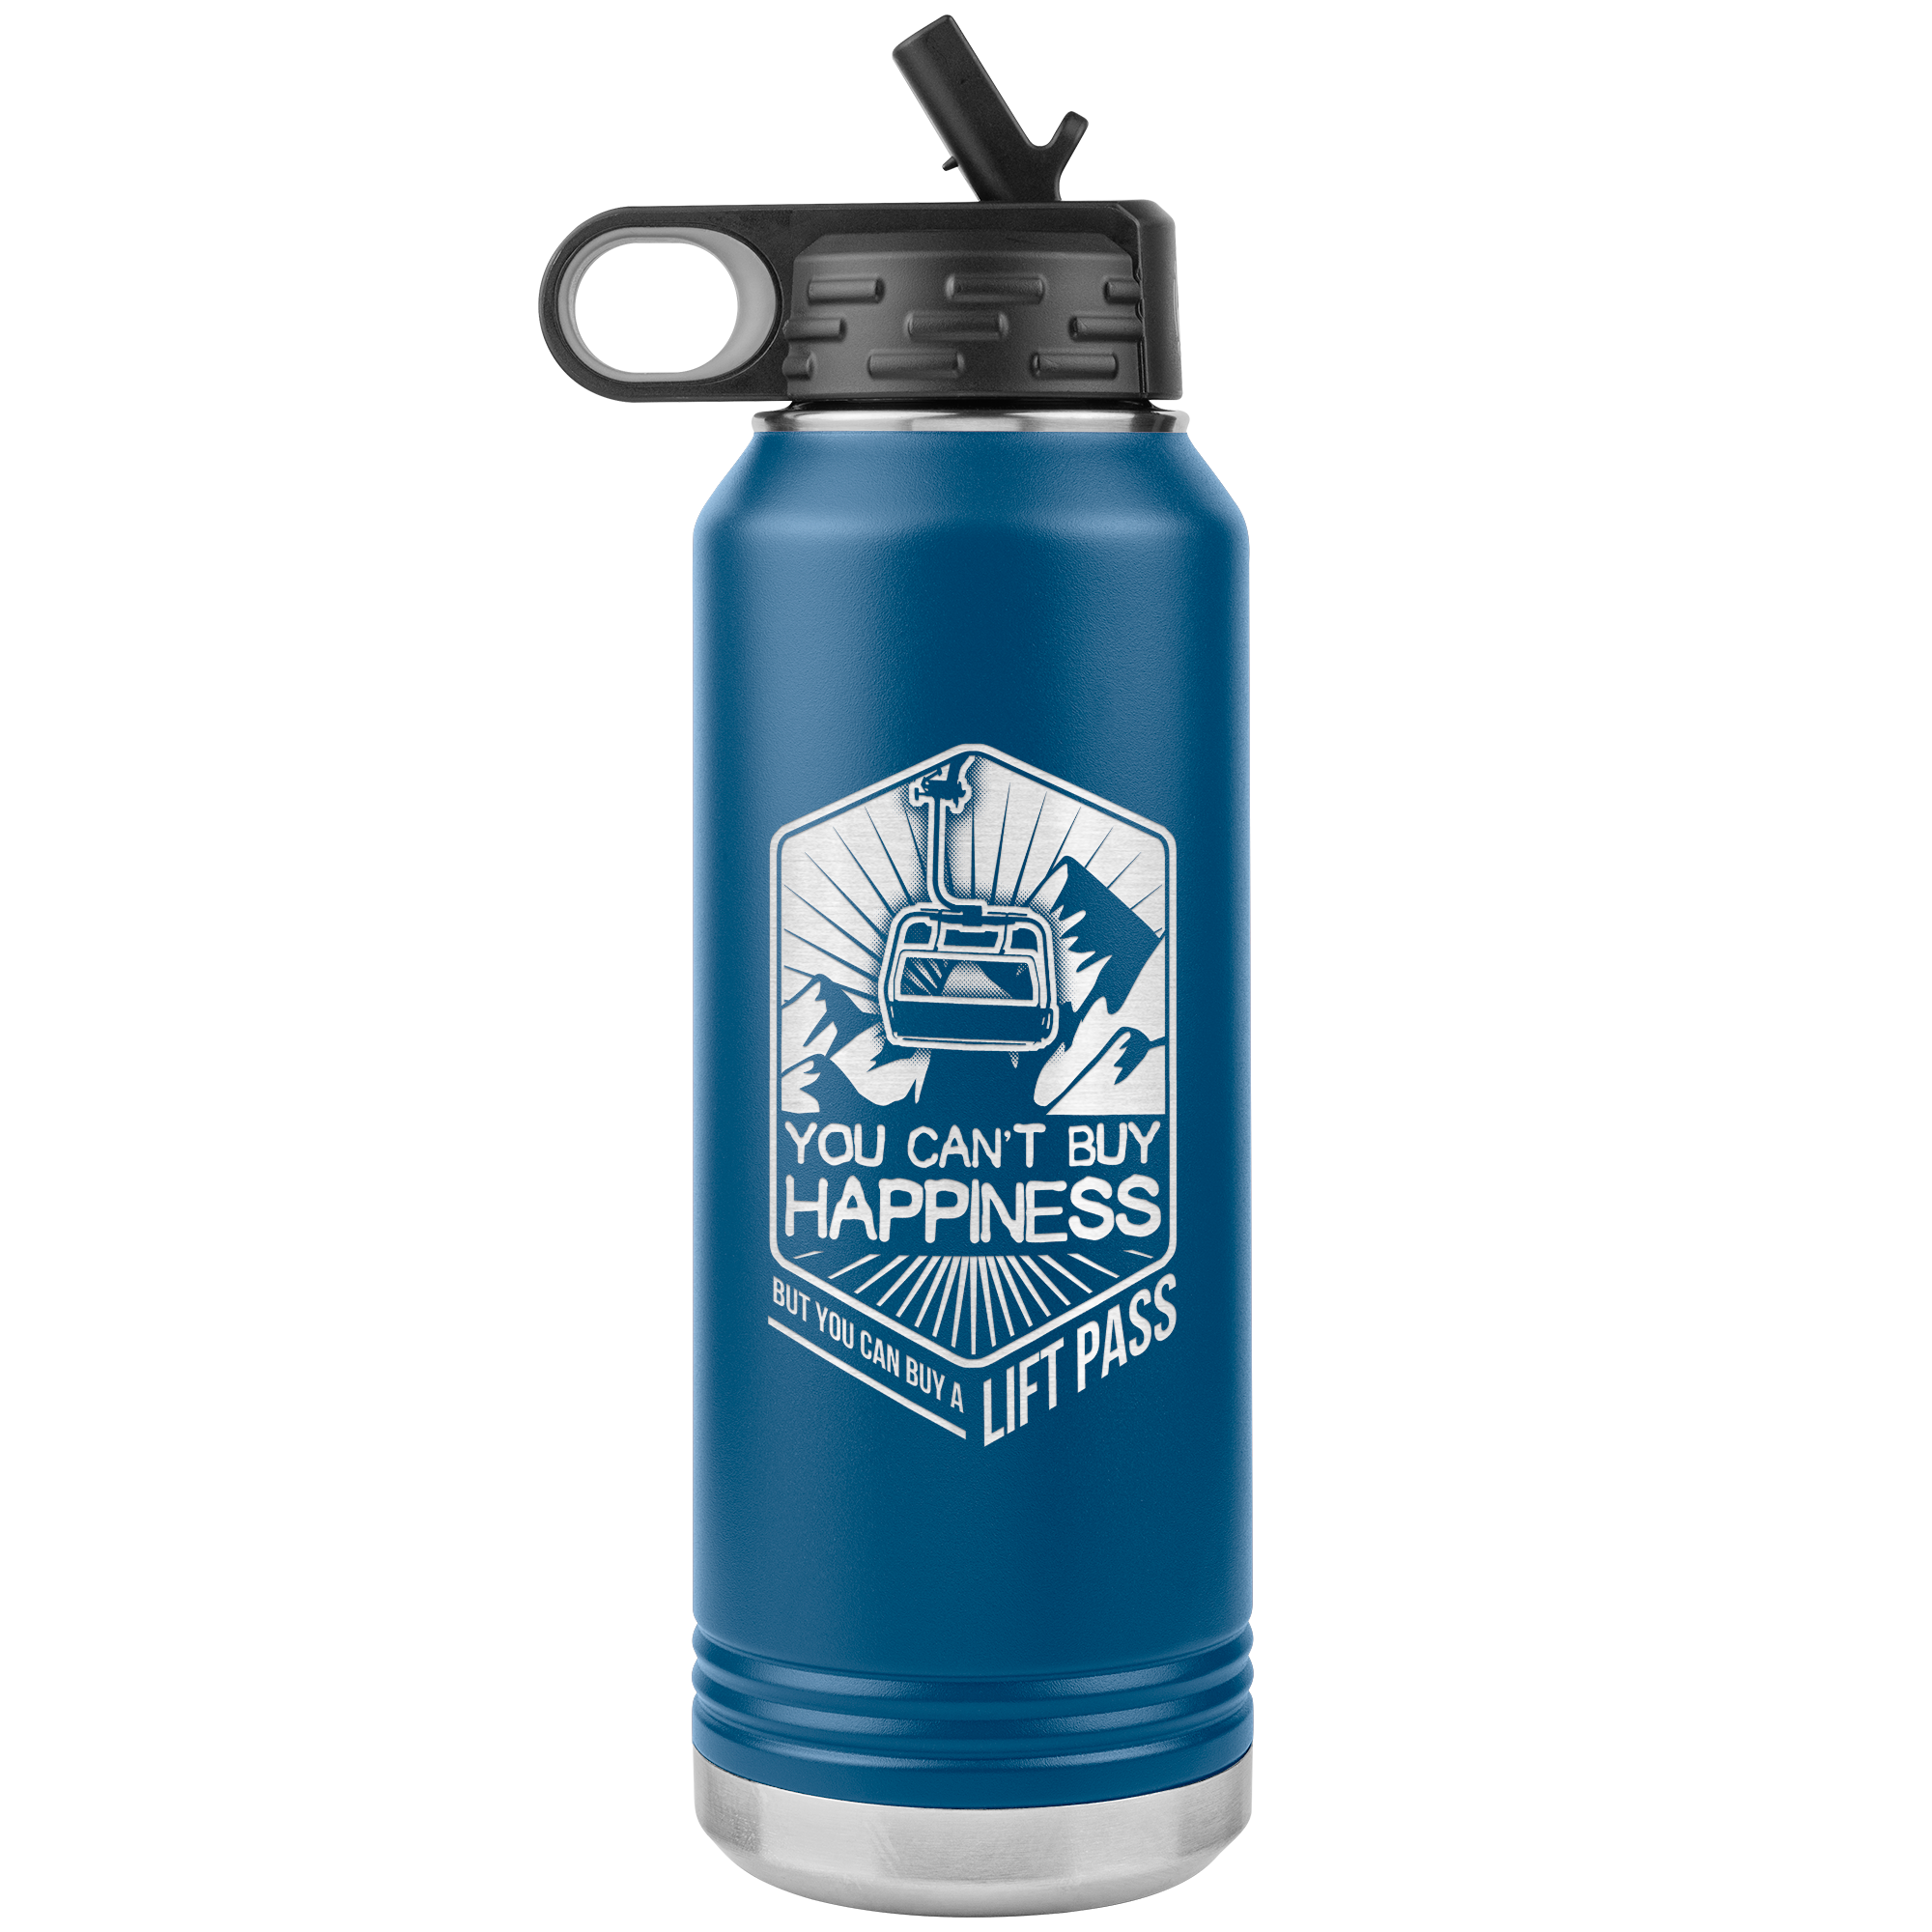 You Can't Buy Happiness But You Can Buy A Lift Pass 32oz Water Bottle Tumbler - Powderaddicts